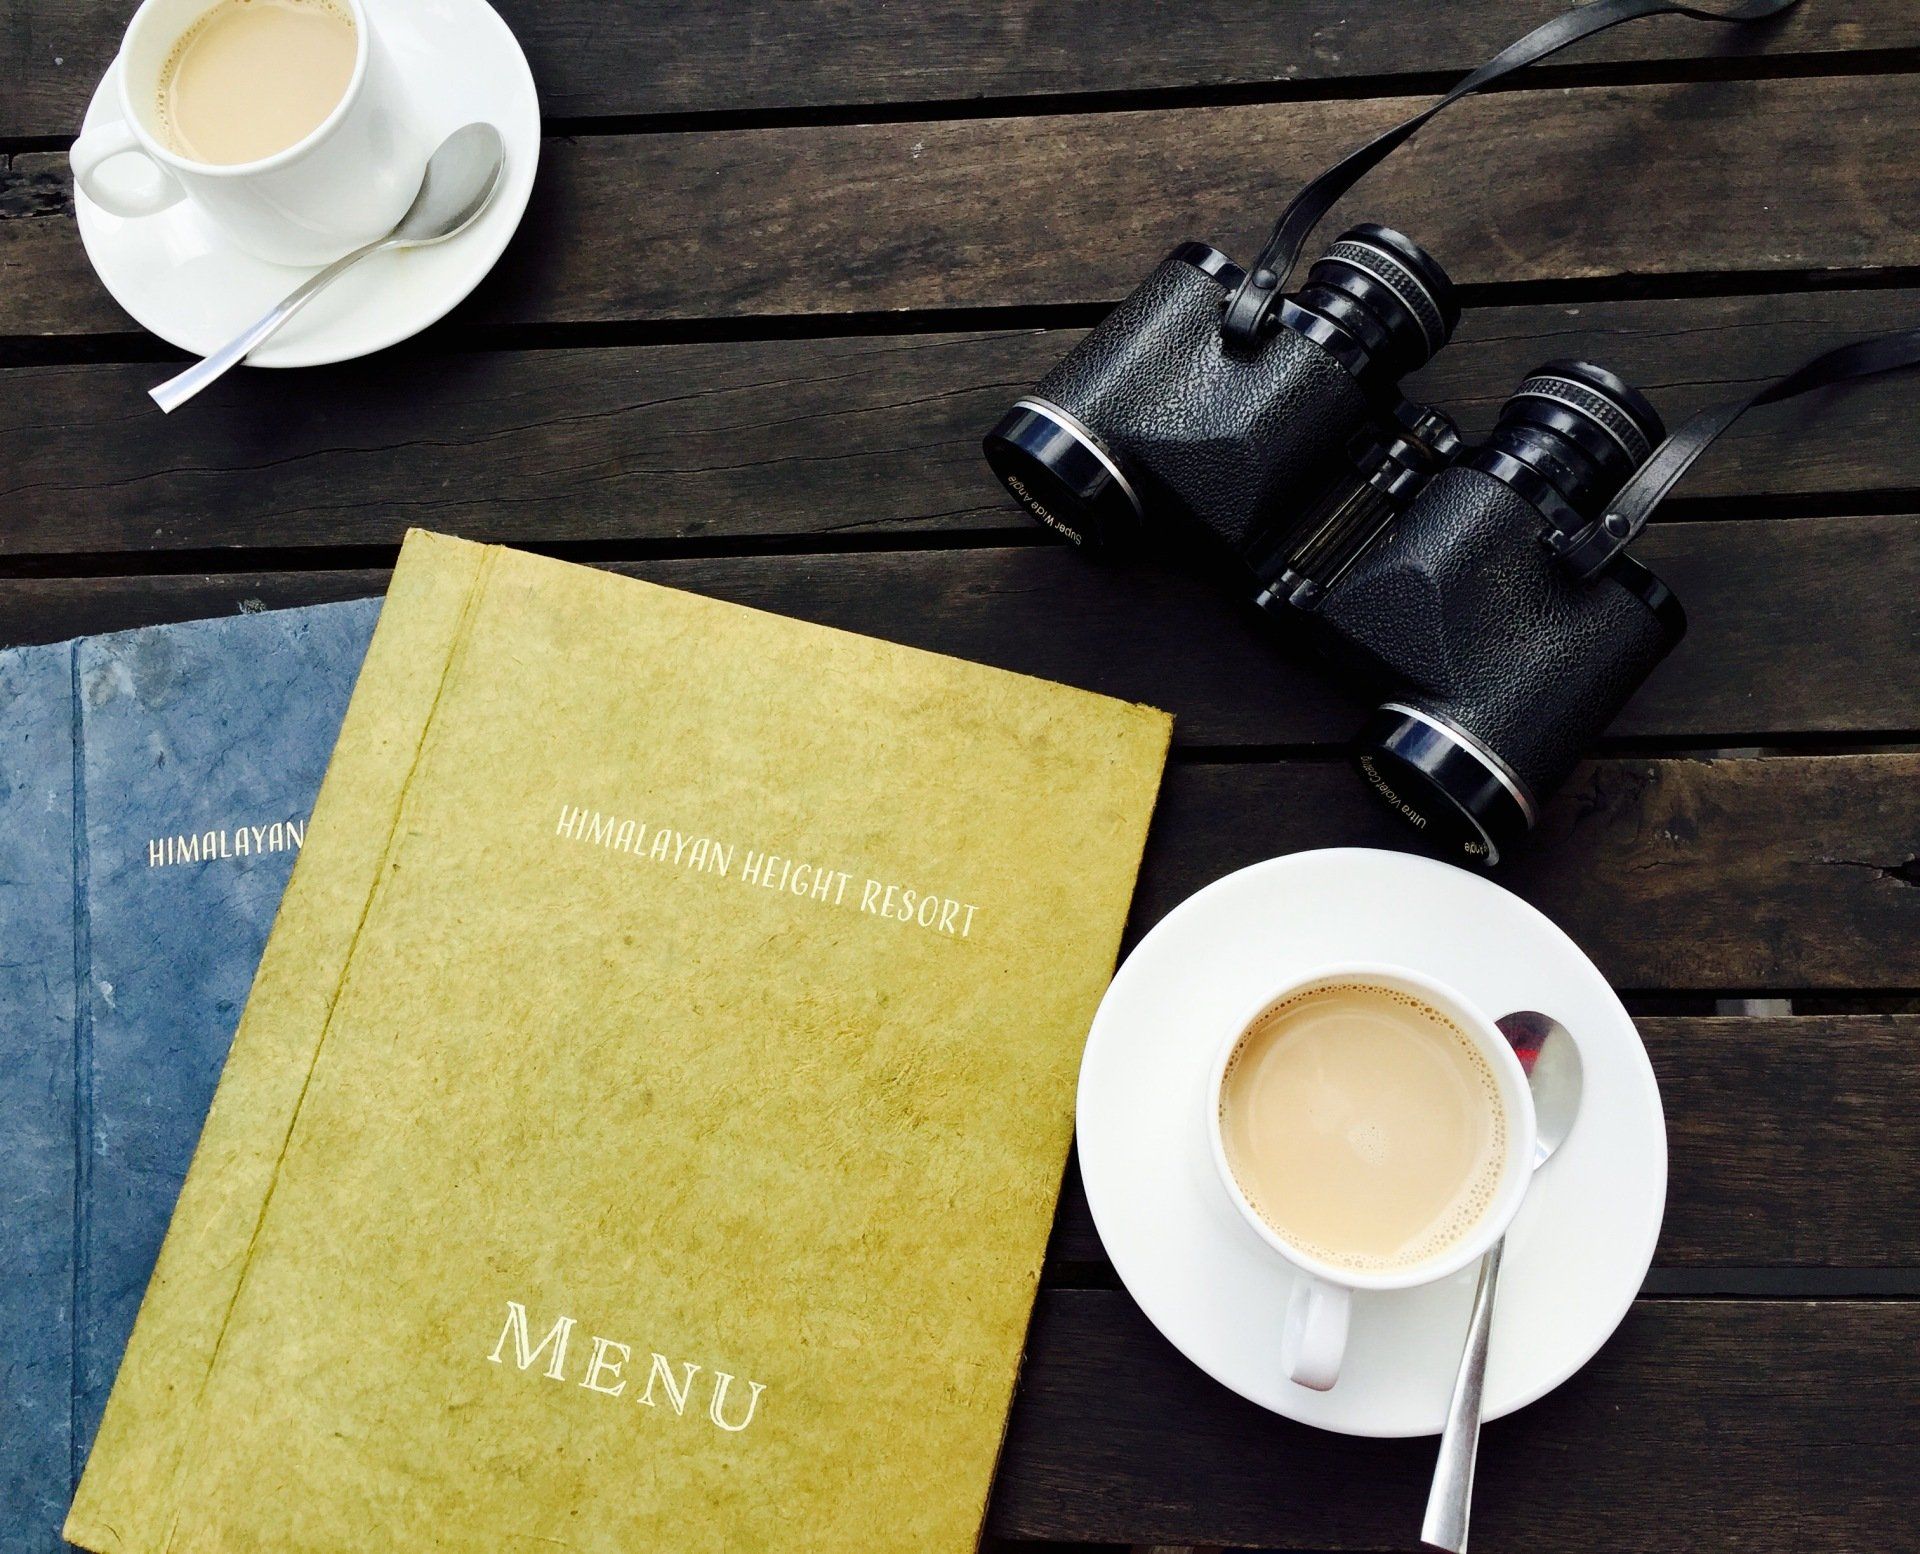 a menu is on a table next to a cup of coffee and binoculars